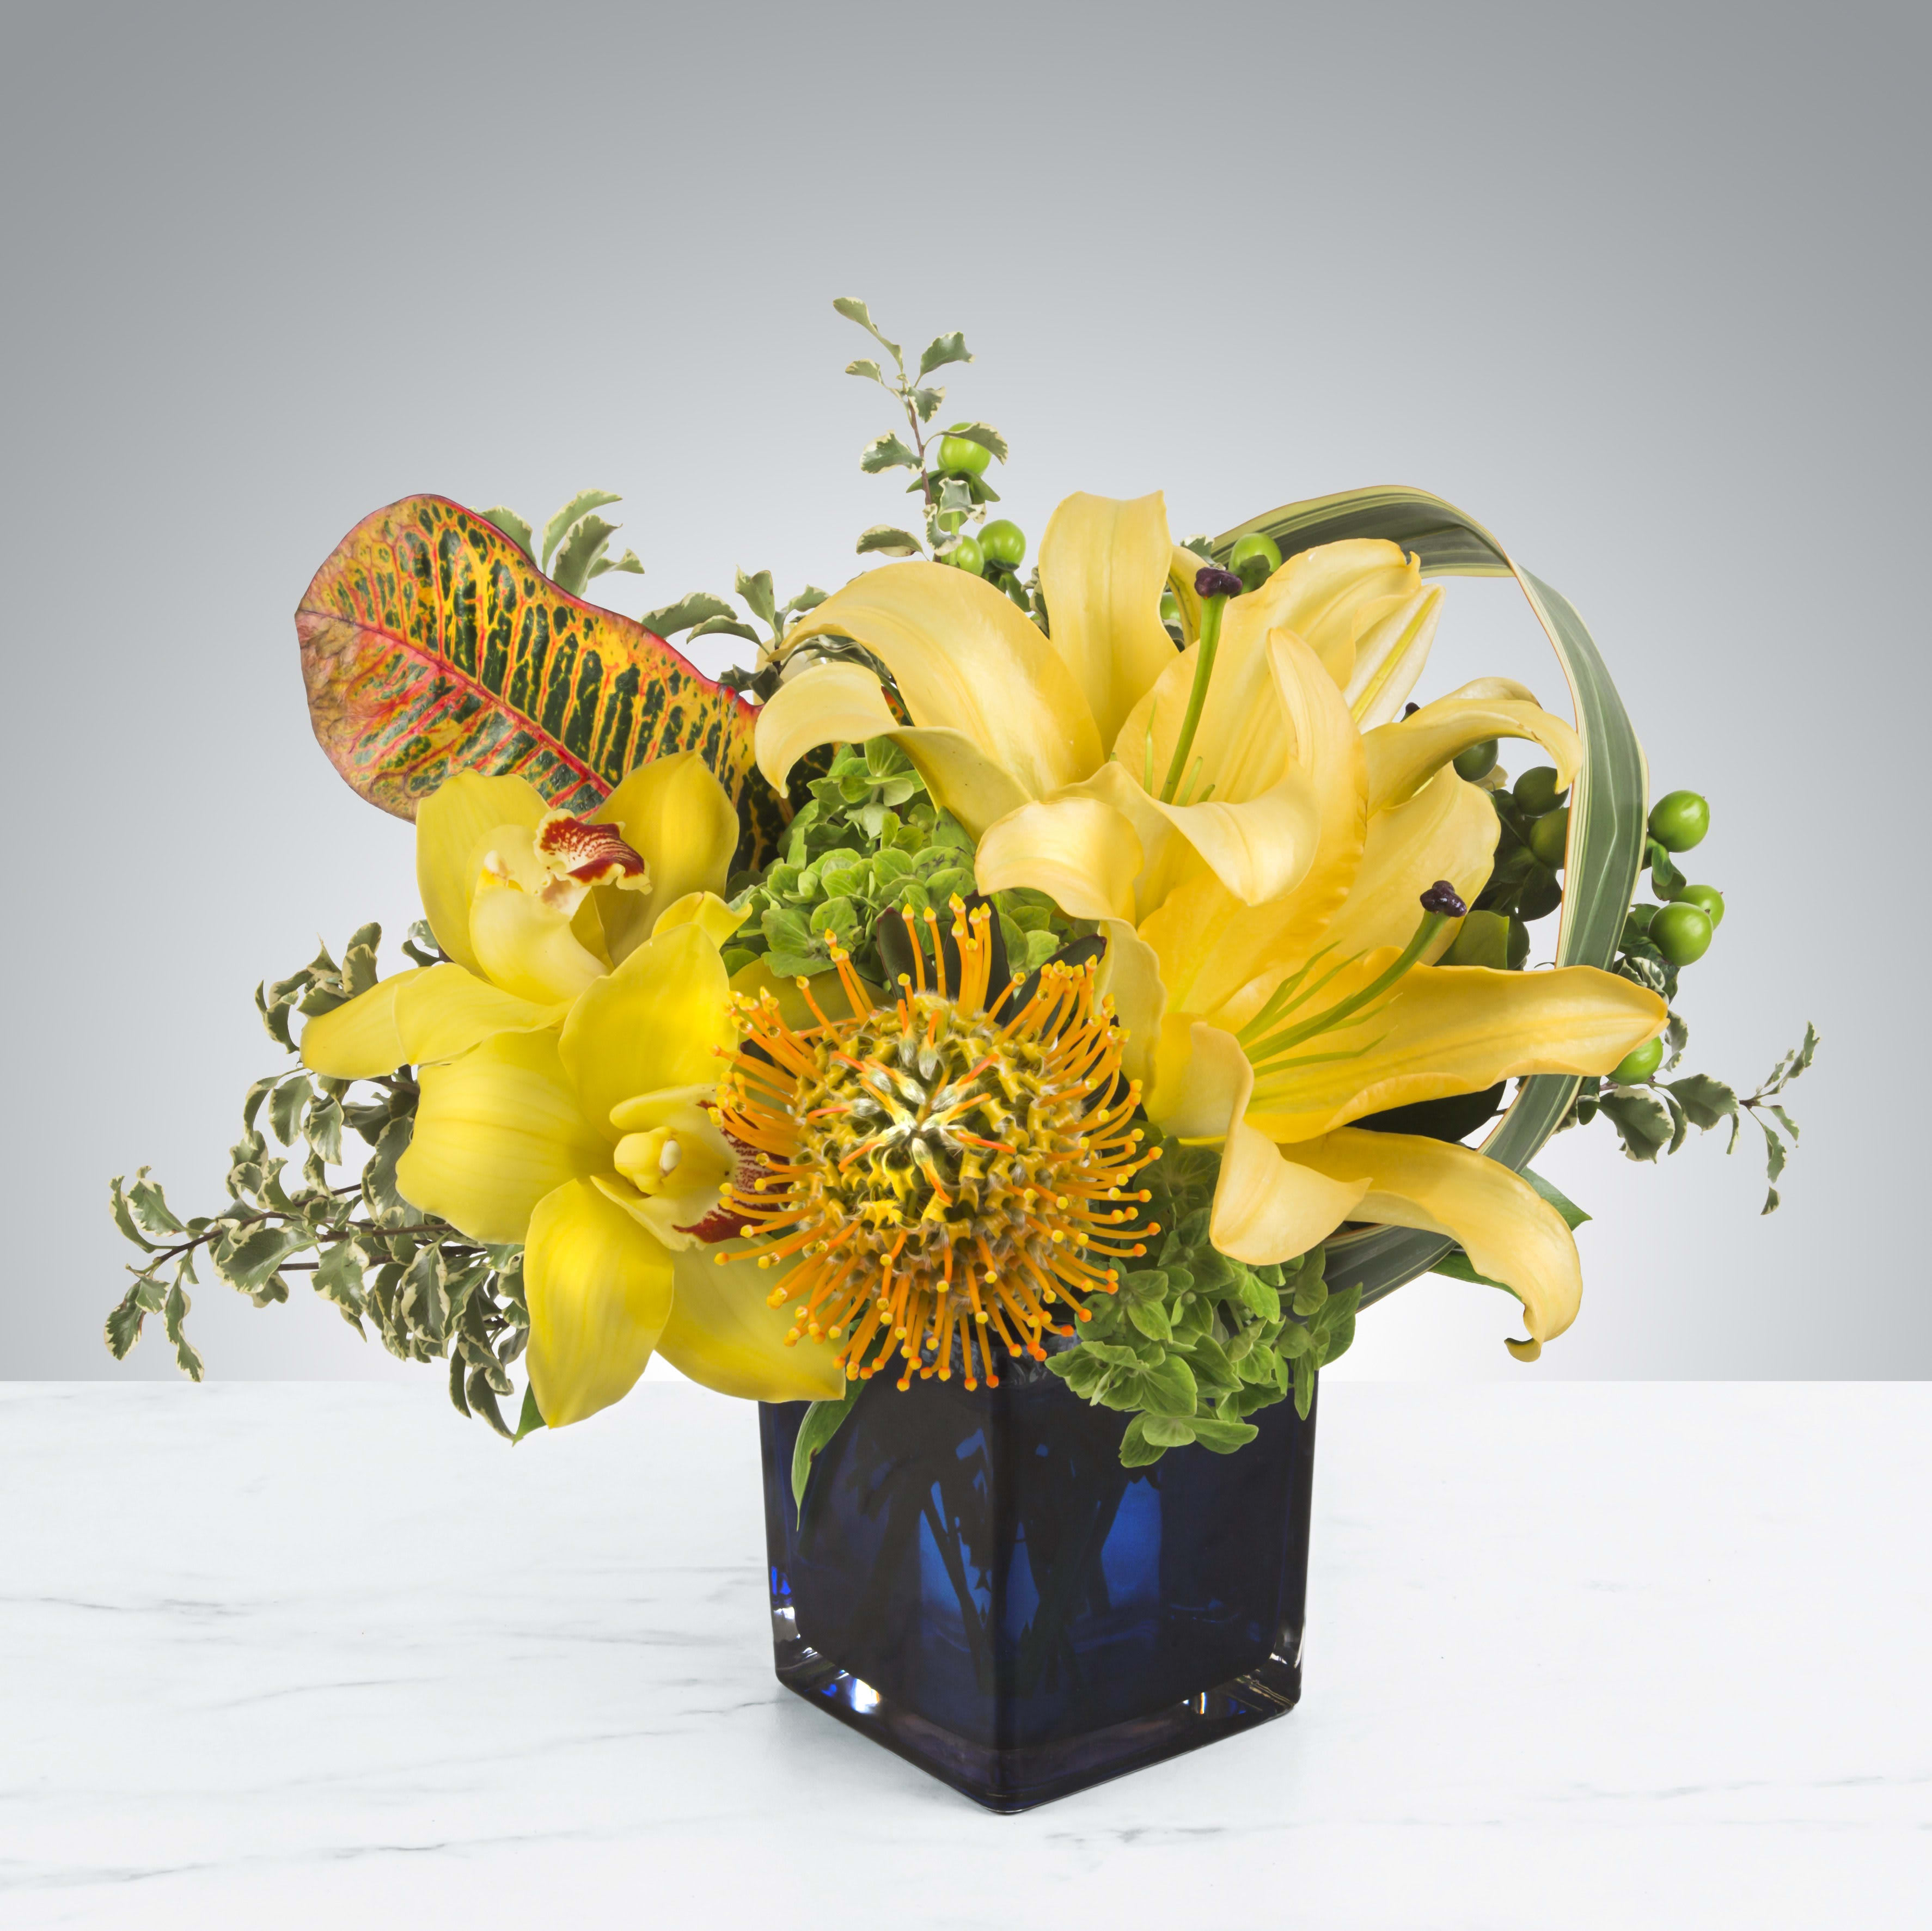 Blueprint  - This yellow lily arrangement features a pincushion protea, an architectural shape and a blue cube vase. Blueprint by BloomNation™ is the perfect gift to send when you want to say thank you or wish somebody good luck. Bright colors and cool lines make this arrangement a perfect corporate or personal gift.    